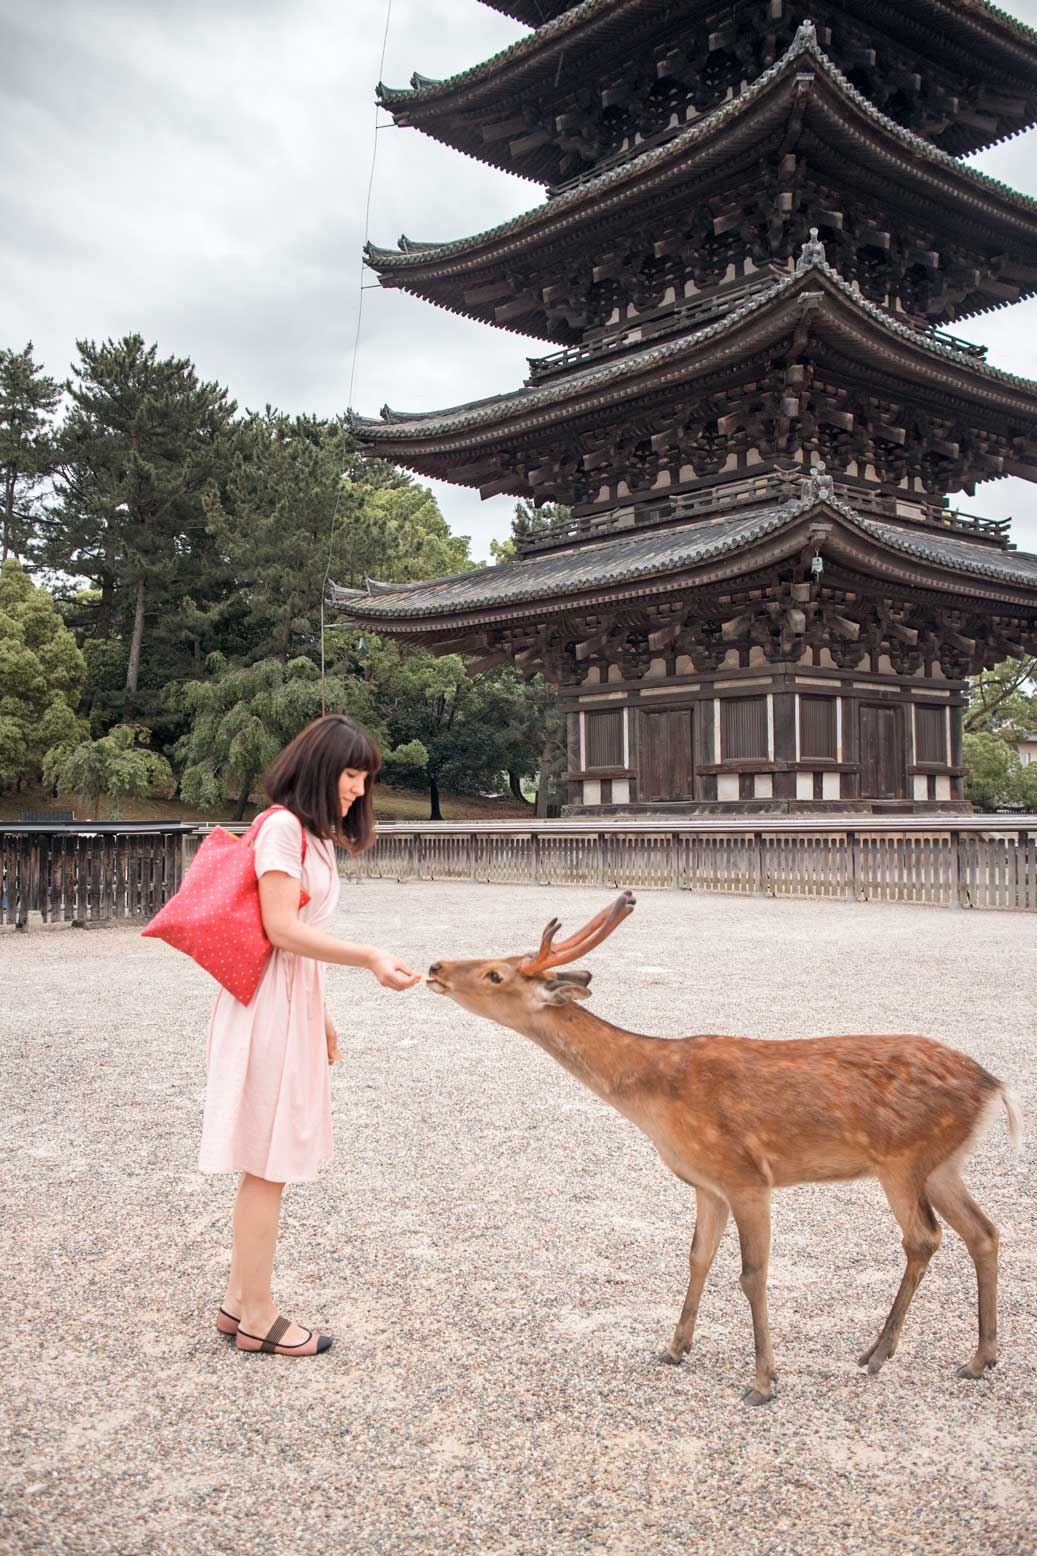 The Best of Japan: A Cultural Journey through Kyoto, Nara and Osaka